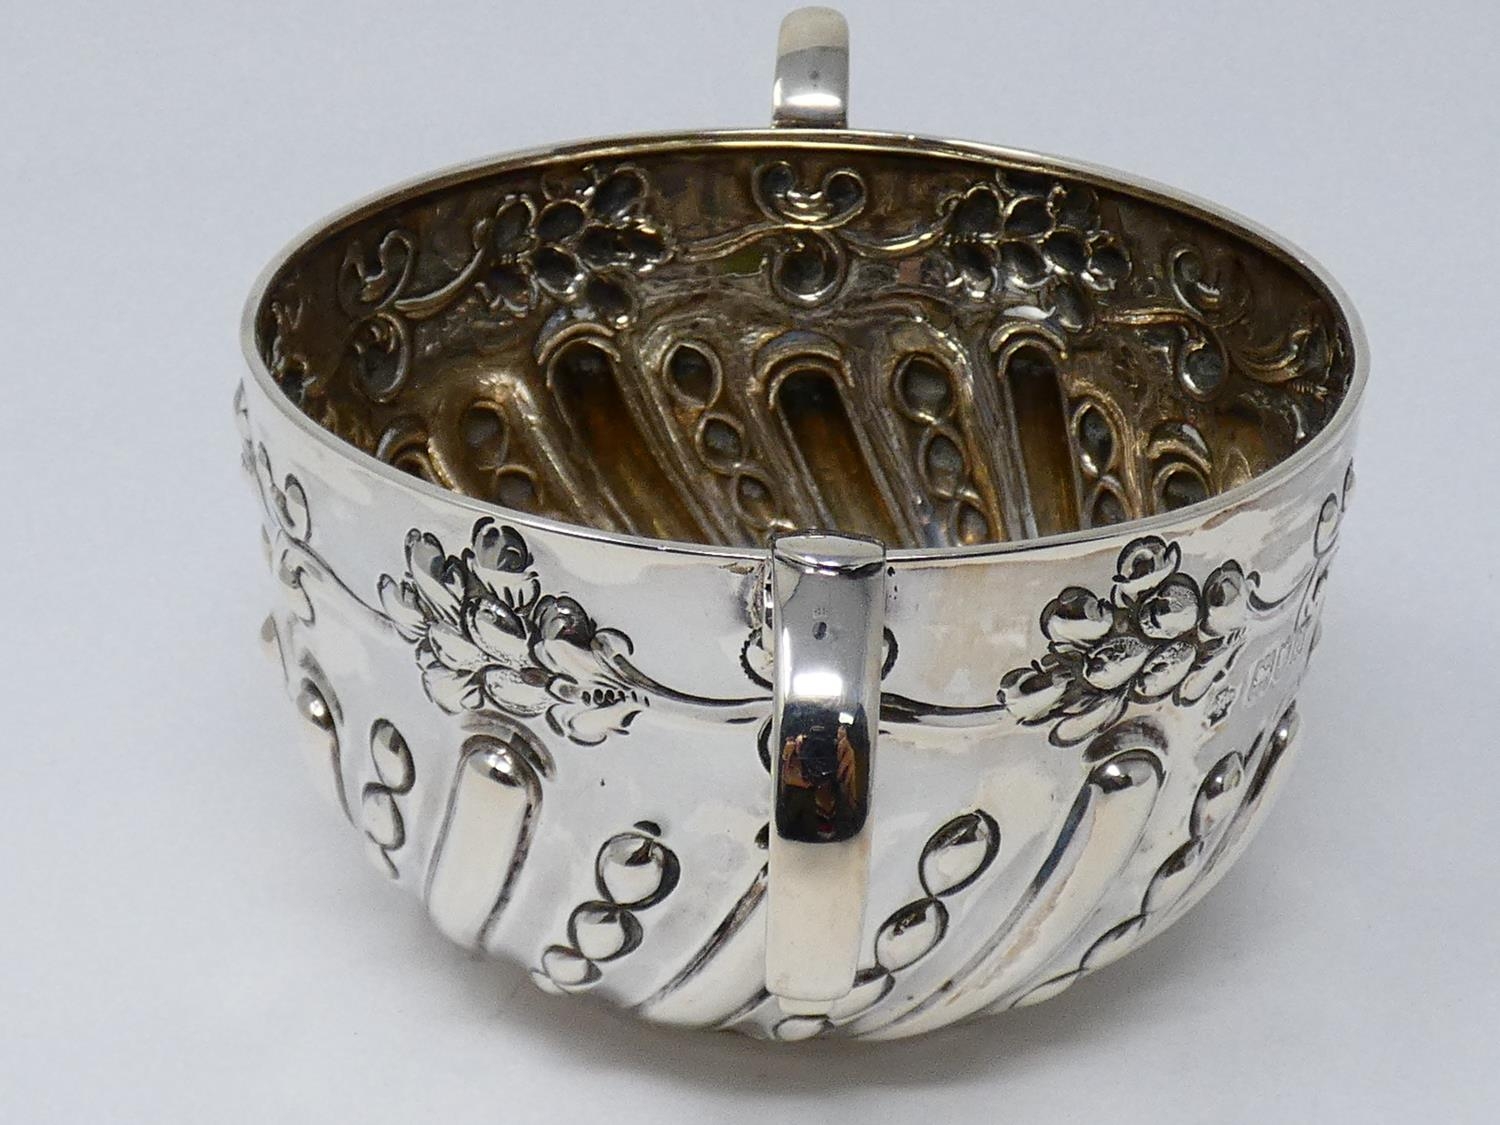 A two handled Victorian repousse design silver porriger with floral design and scrolling handles. - Image 6 of 6